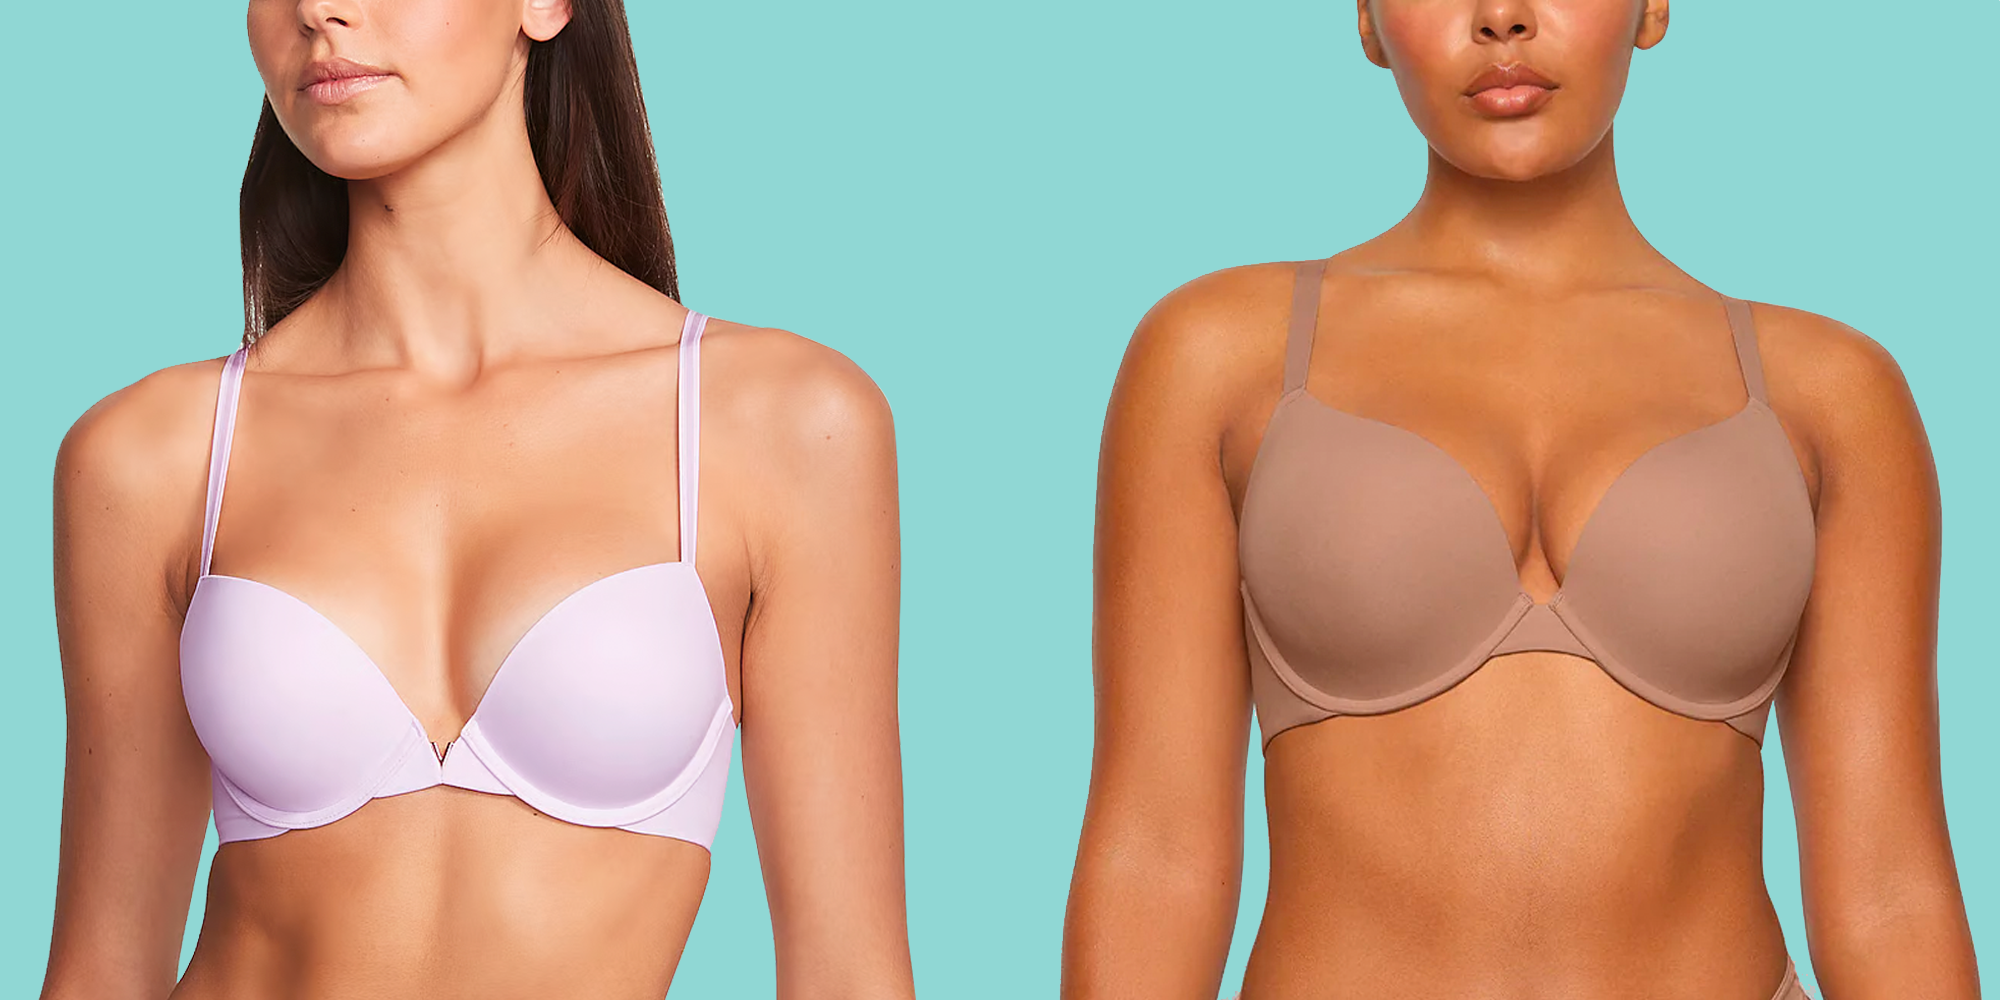 damian cavanagh recommends Push Up Bra For Big Boobs